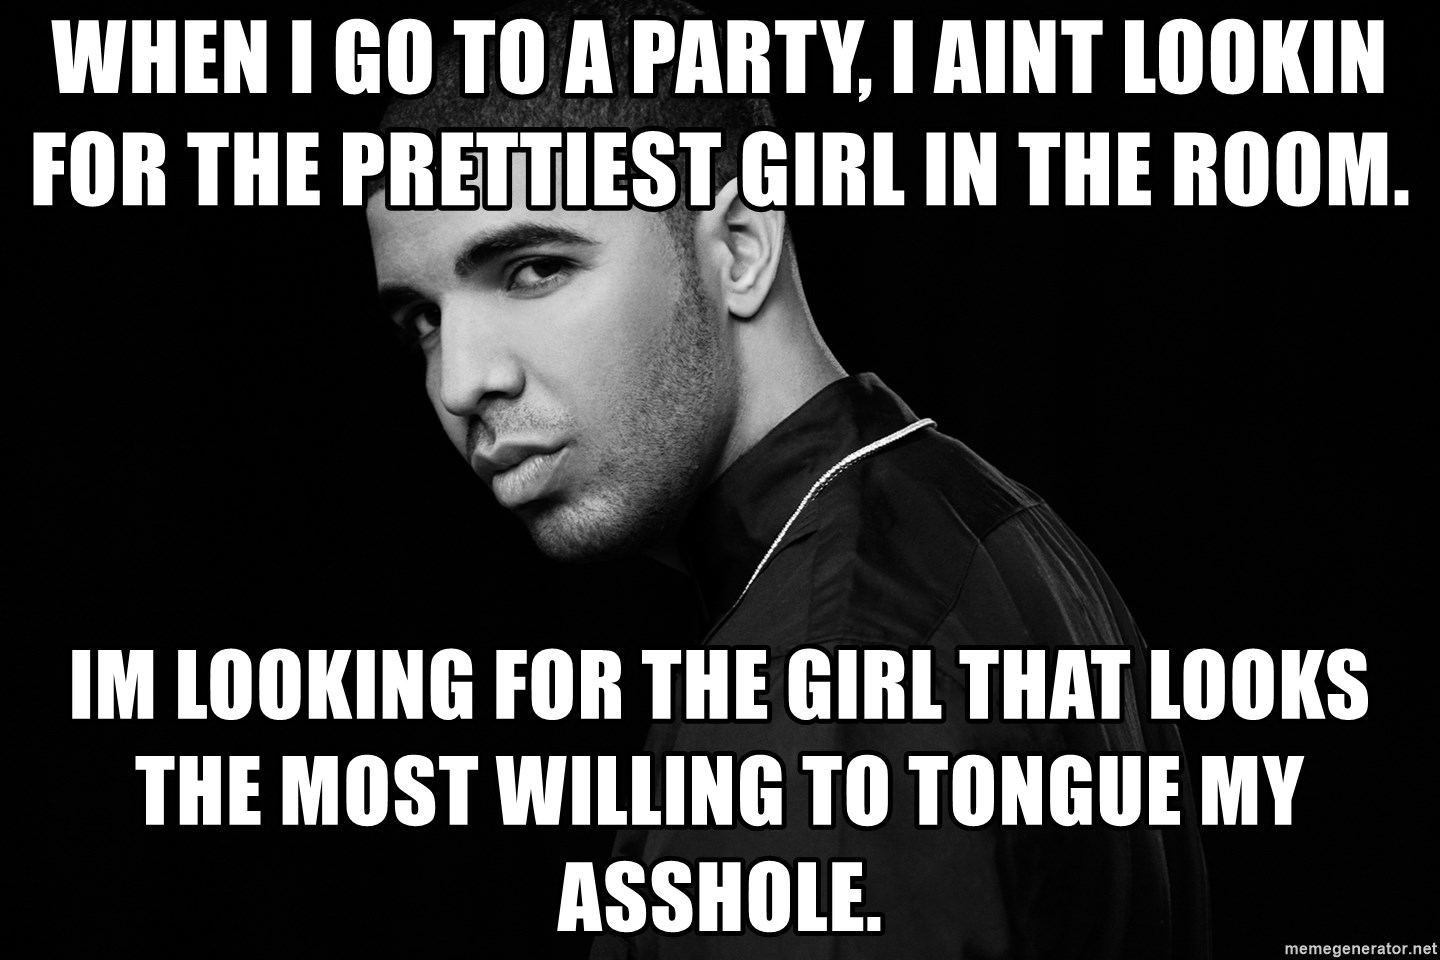 Drake quotes - when i go to a party, i aint lookin for the prettiest girl in the room. im looking for the girl that looks the most willing to tongue my asshole.